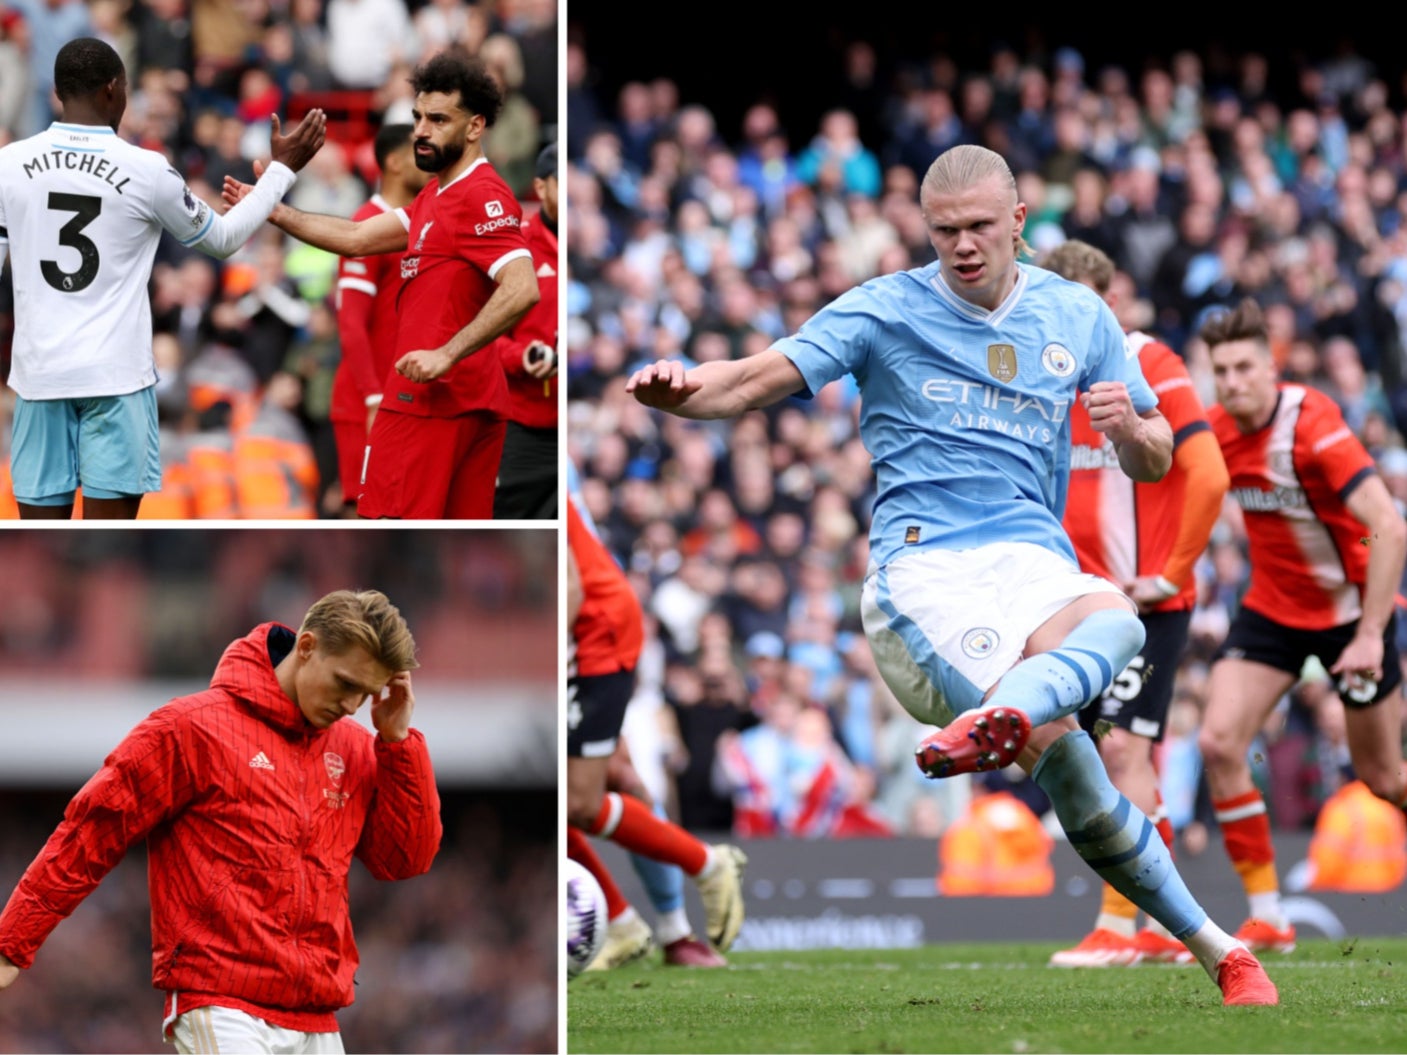 Liverpool and Arsenal face the pressure of knowing City are unlikely to relent